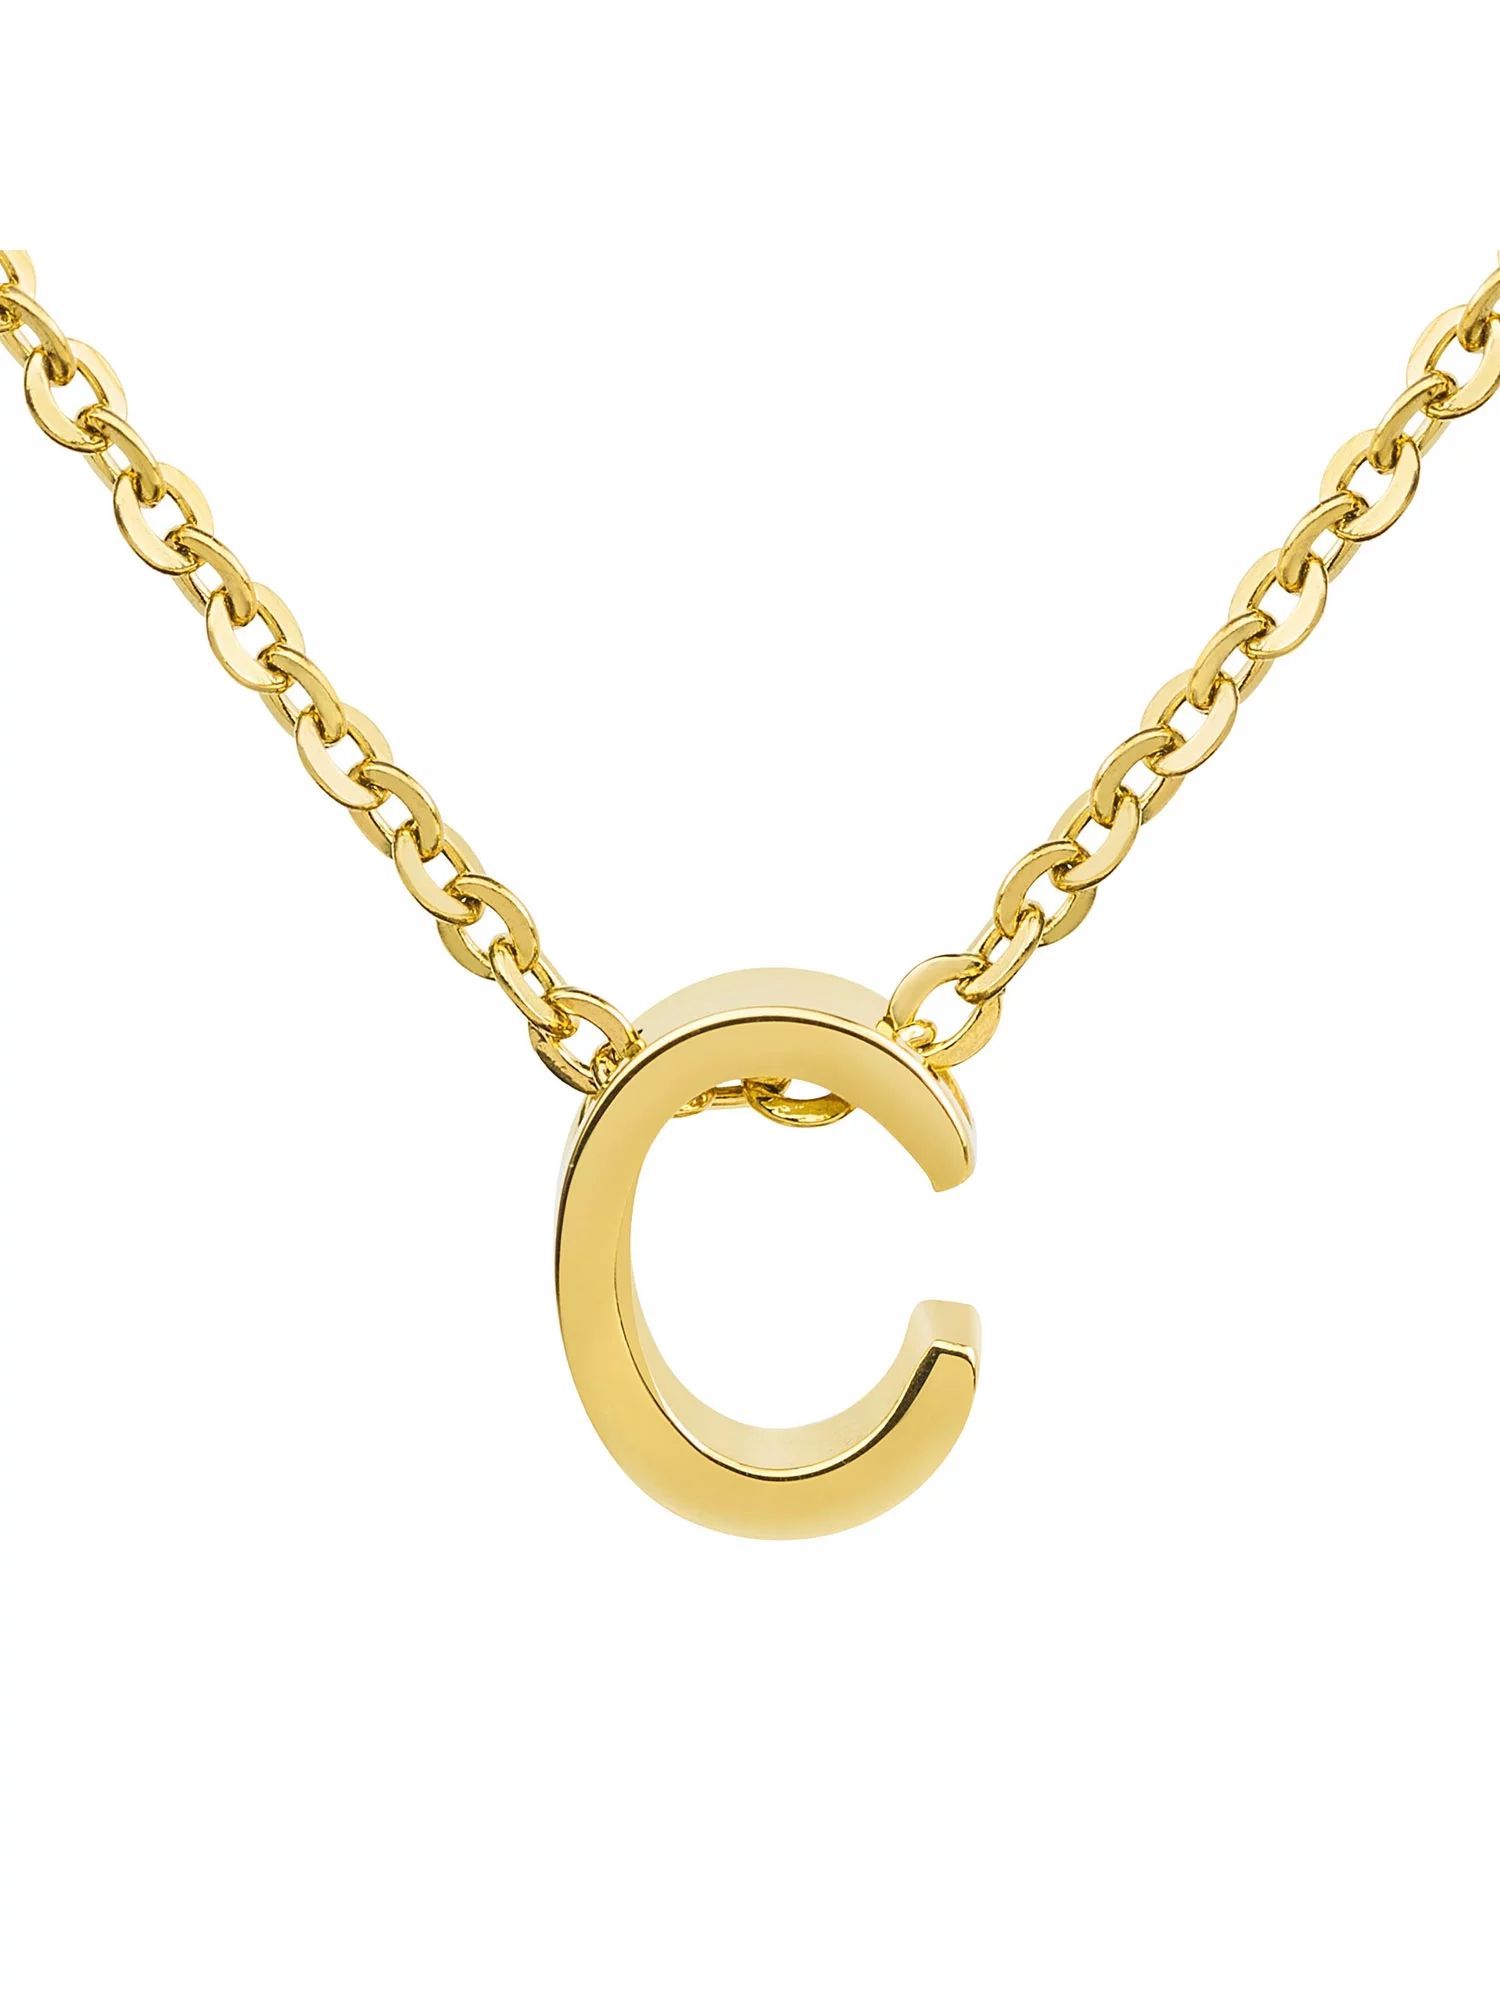 Coastal Jewelry Women's 18k Gold Overlay Initial Necklace (18") - Letter C | Walmart (US)